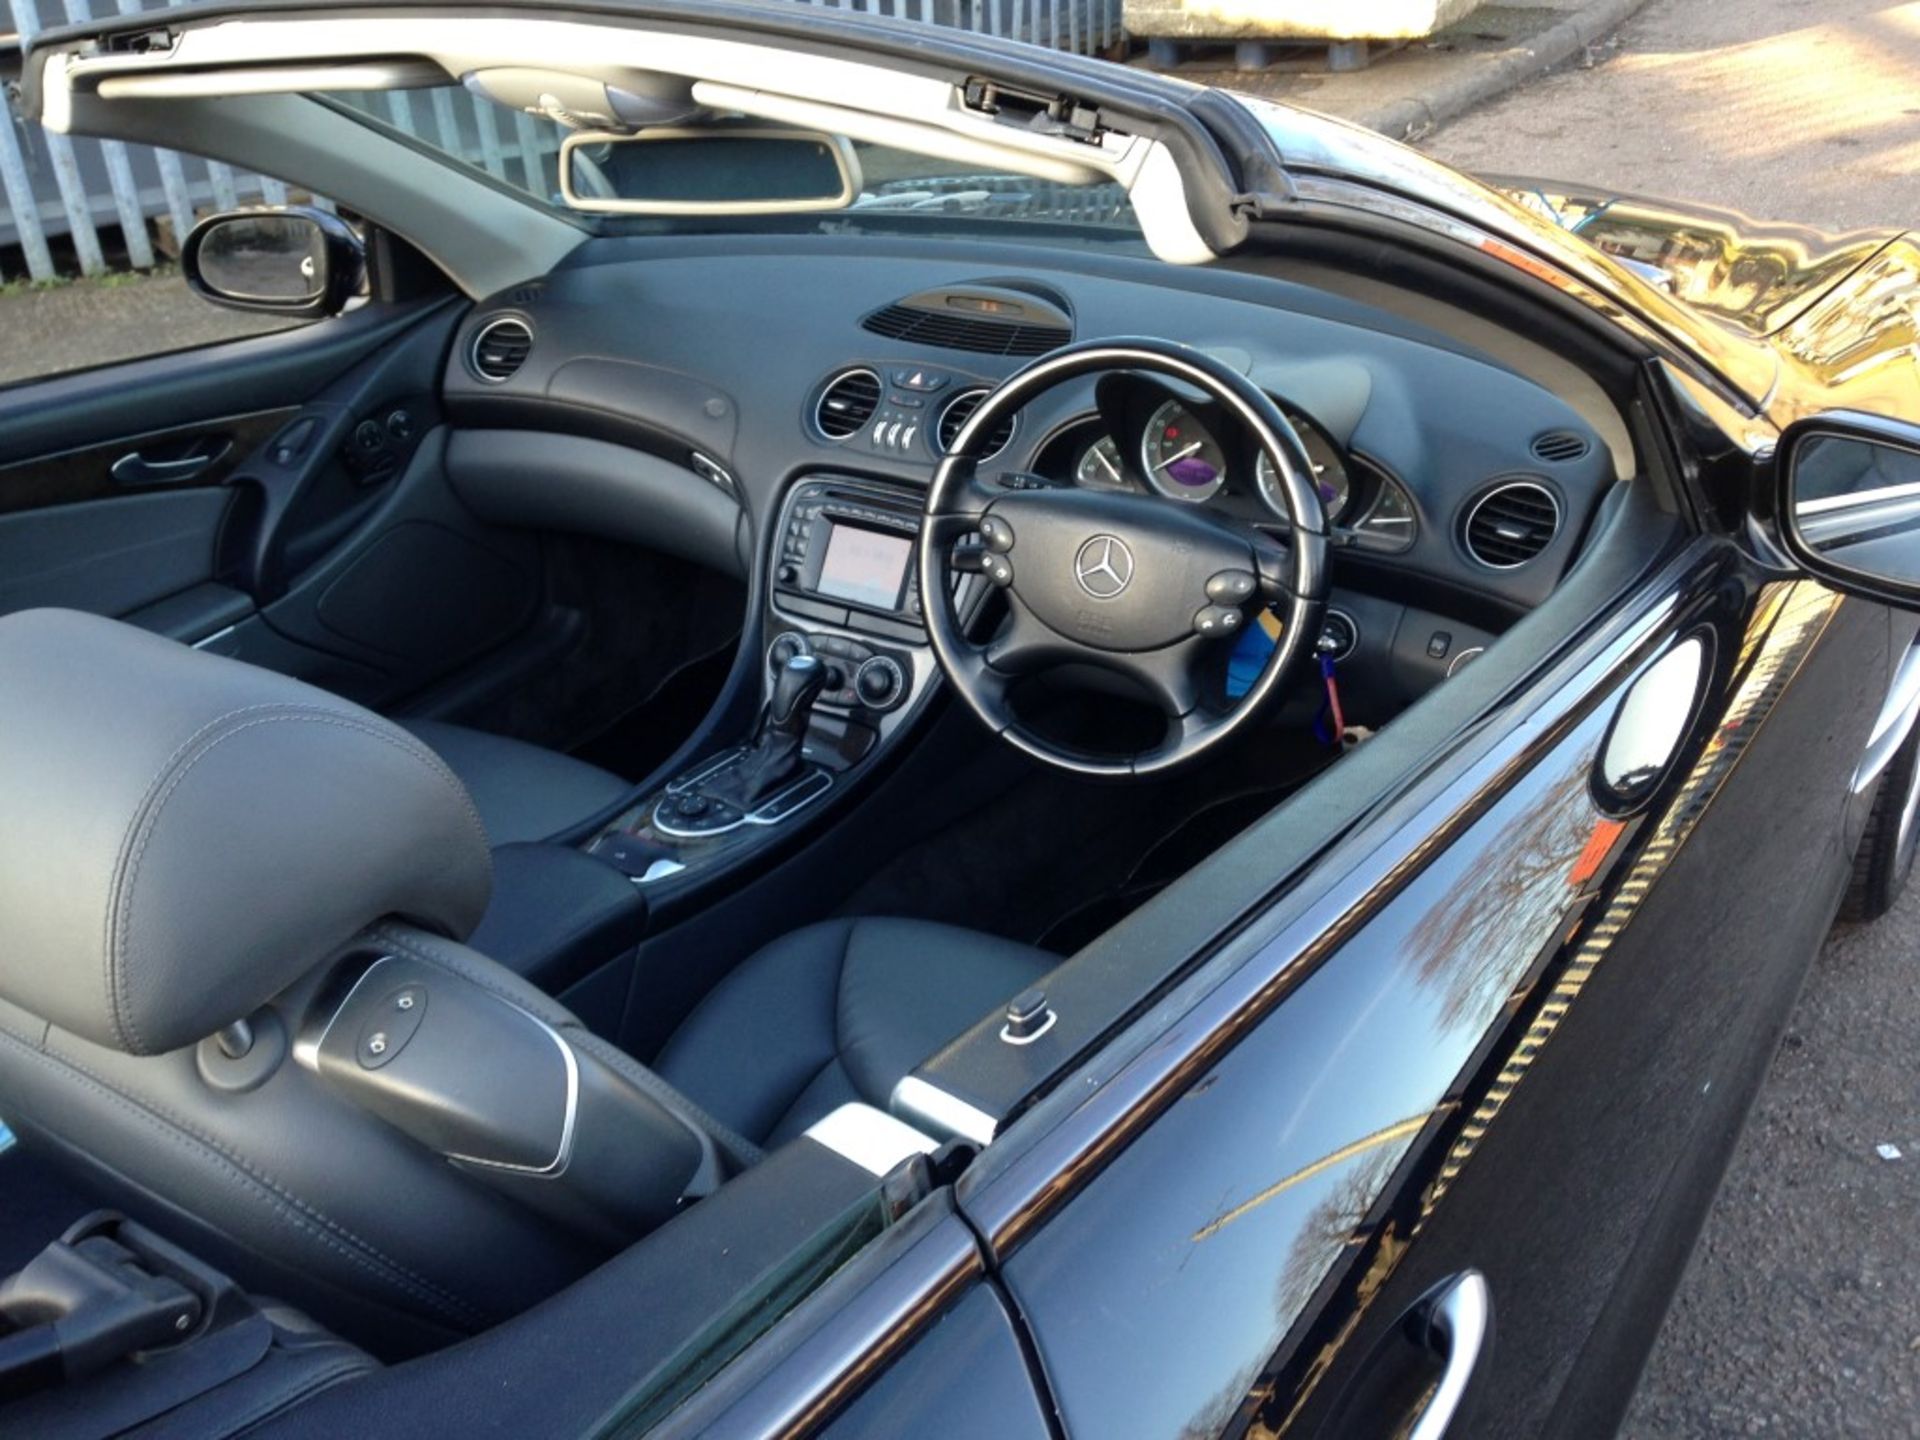 1 x Mercedes SL500 Automatic 5.0 Convertible - Petrol - Year 2002 - 94,500 Miles - Long MOT Expiry - Image 26 of 31